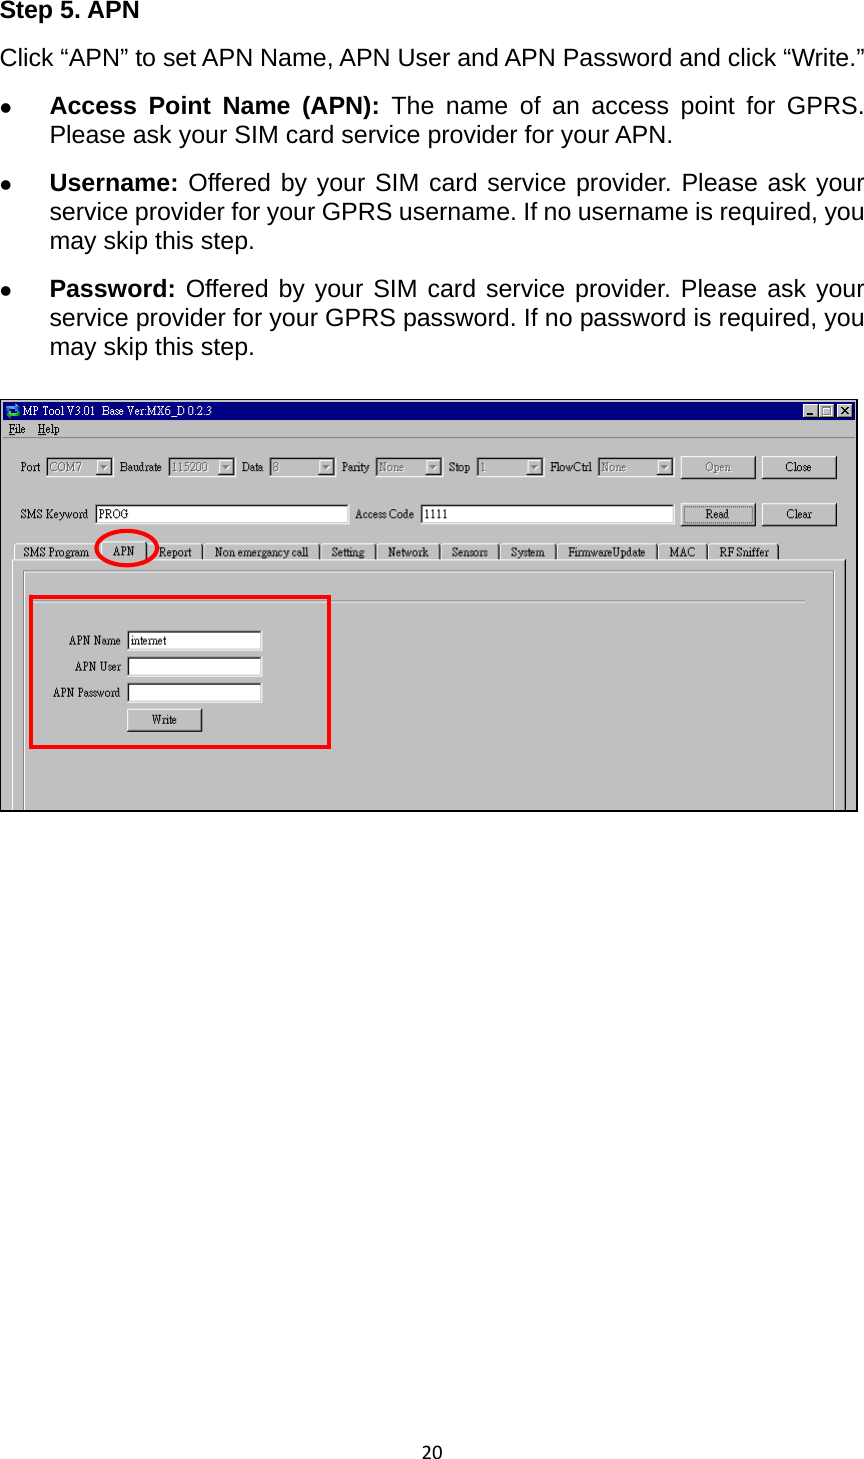 20Step 5. APN Click “APN” to set APN Name, APN User and APN Password and click “Write.”   z Access Point Name (APN): The name of an access point for GPRS. Please ask your SIM card service provider for your APN.   z Username: Offered by your SIM card service provider. Please ask your service provider for your GPRS username. If no username is required, you may skip this step. z Password: Offered by your SIM card service provider. Please ask your service provider for your GPRS password. If no password is required, you may skip this step.               